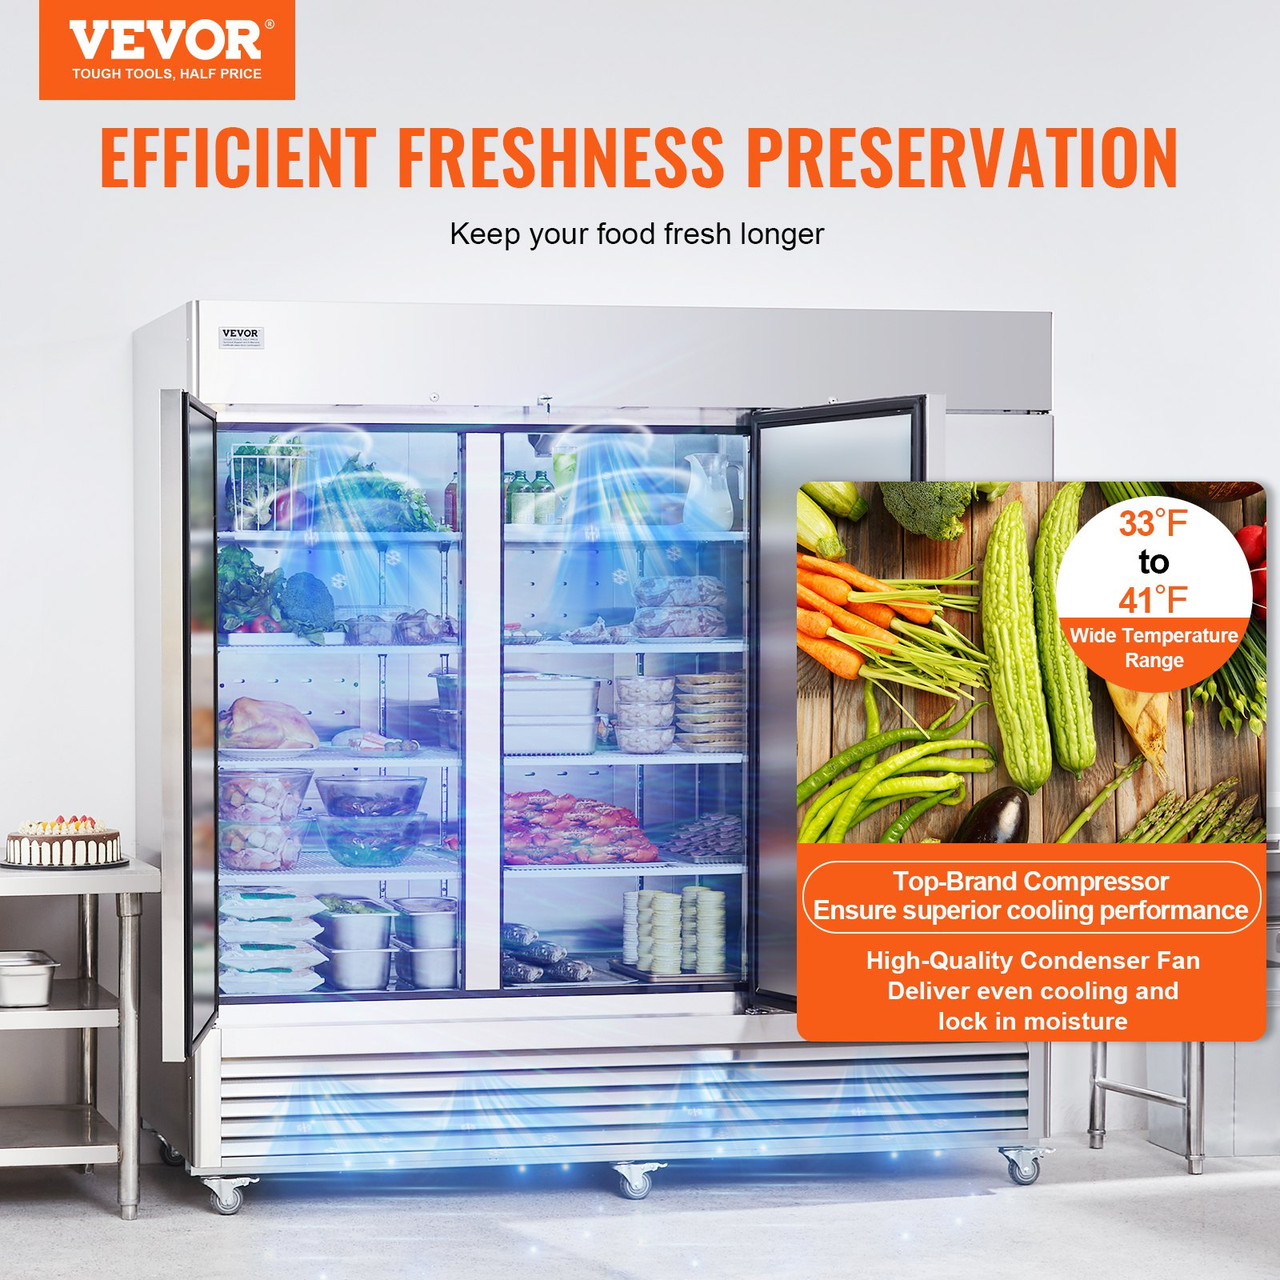 VEVOR Commercial Refrigerator 60.42 Cu.ft, Reach In 82.5" W Upright Refrigerator 3 Doors, Auto-Defrost Stainless Steel Reach-in Refrigerator & 12 Shelves, 33 to 41? Temp Control, LED Light, 4 Wheels